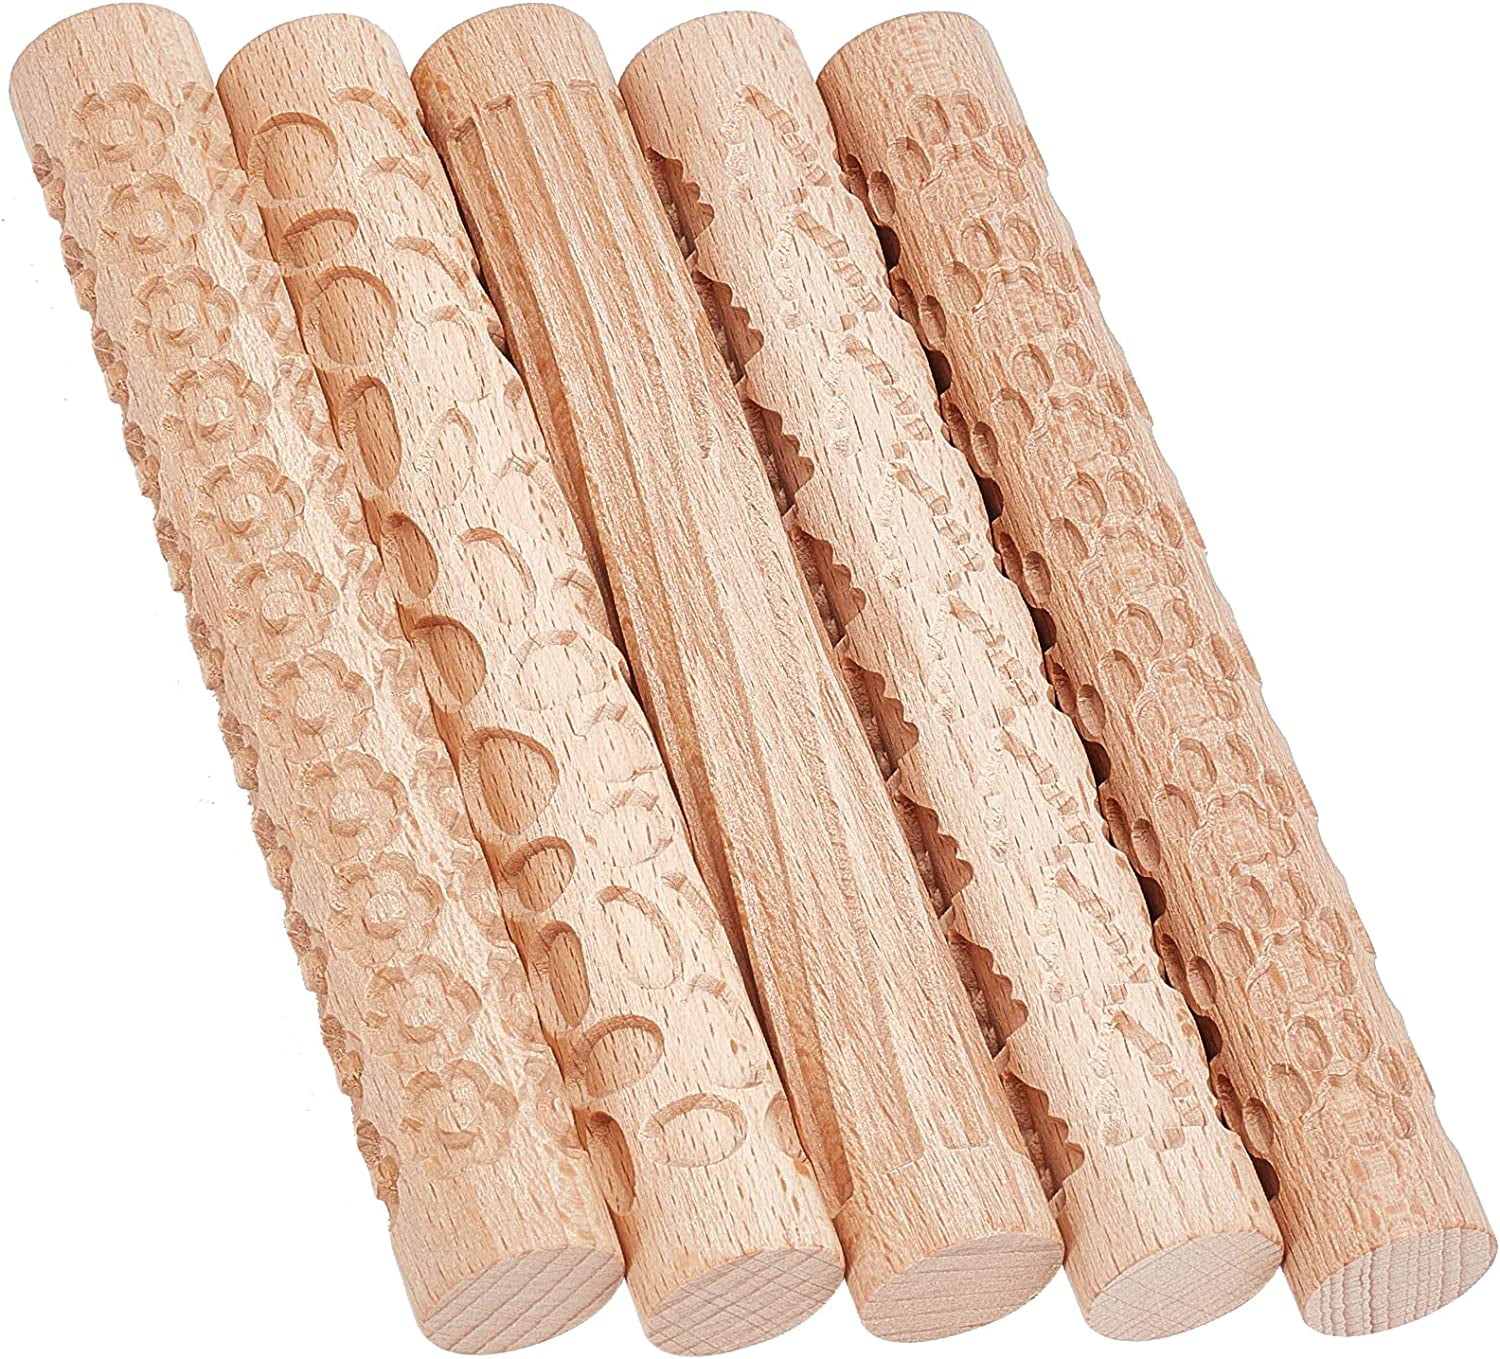  SYWAN 6Pcs Clay Modeling Pattern Rollers Kit, 5.9 Large Texture  Rollers for Clay Clay Rolling Pin Textured Hand Roller Wooden Handle Pottery  Tools : Arts, Crafts & Sewing